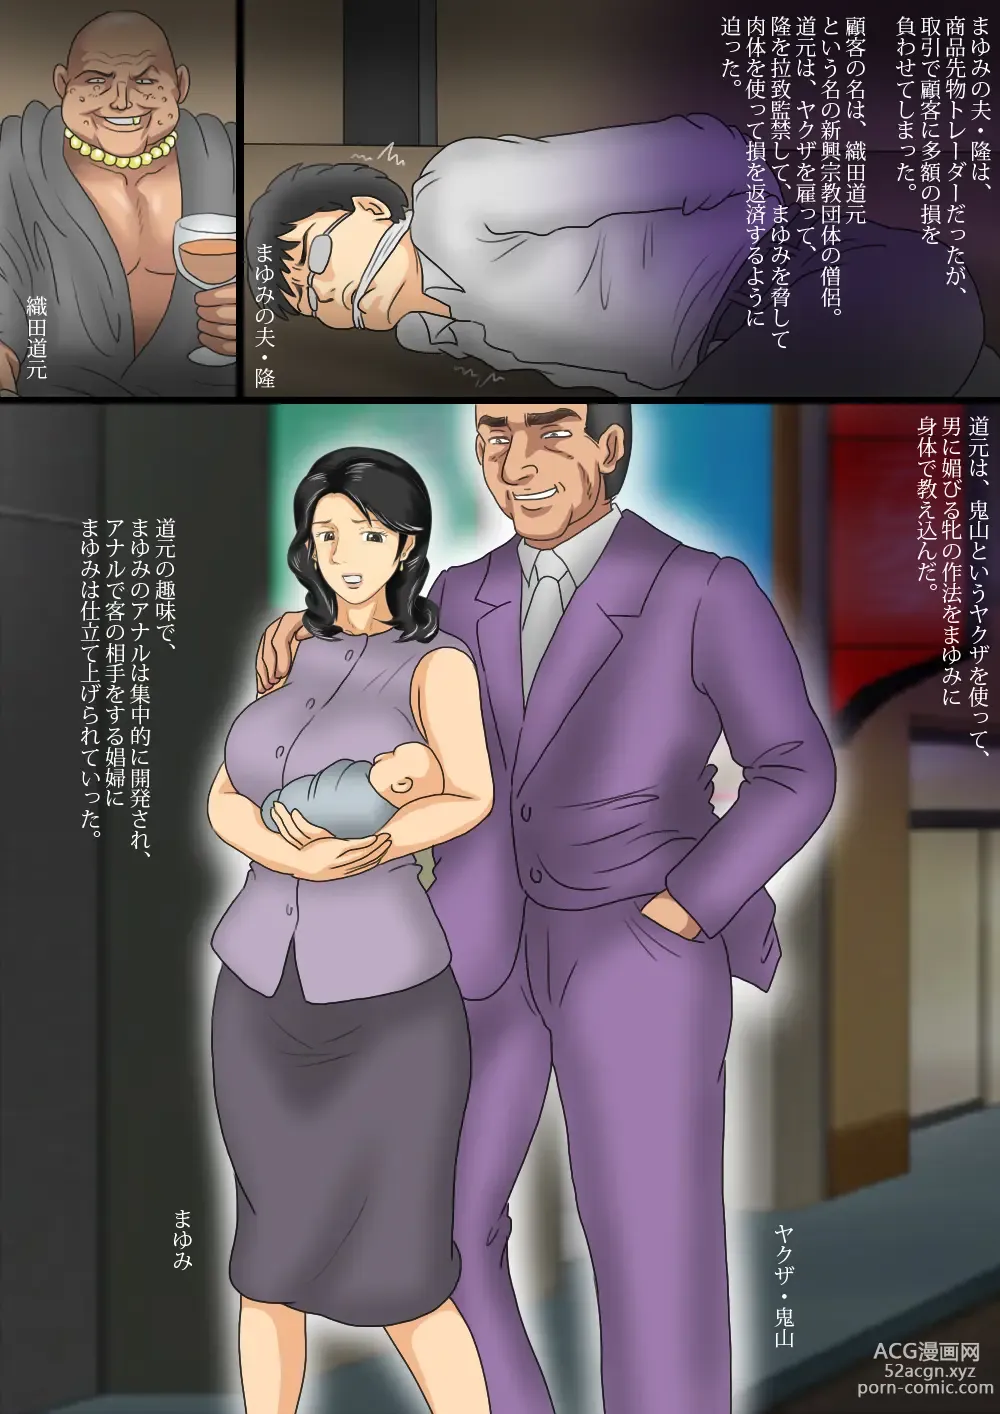 Page 2 of doujinshi Anal Prostitute Mother Mayumi 1